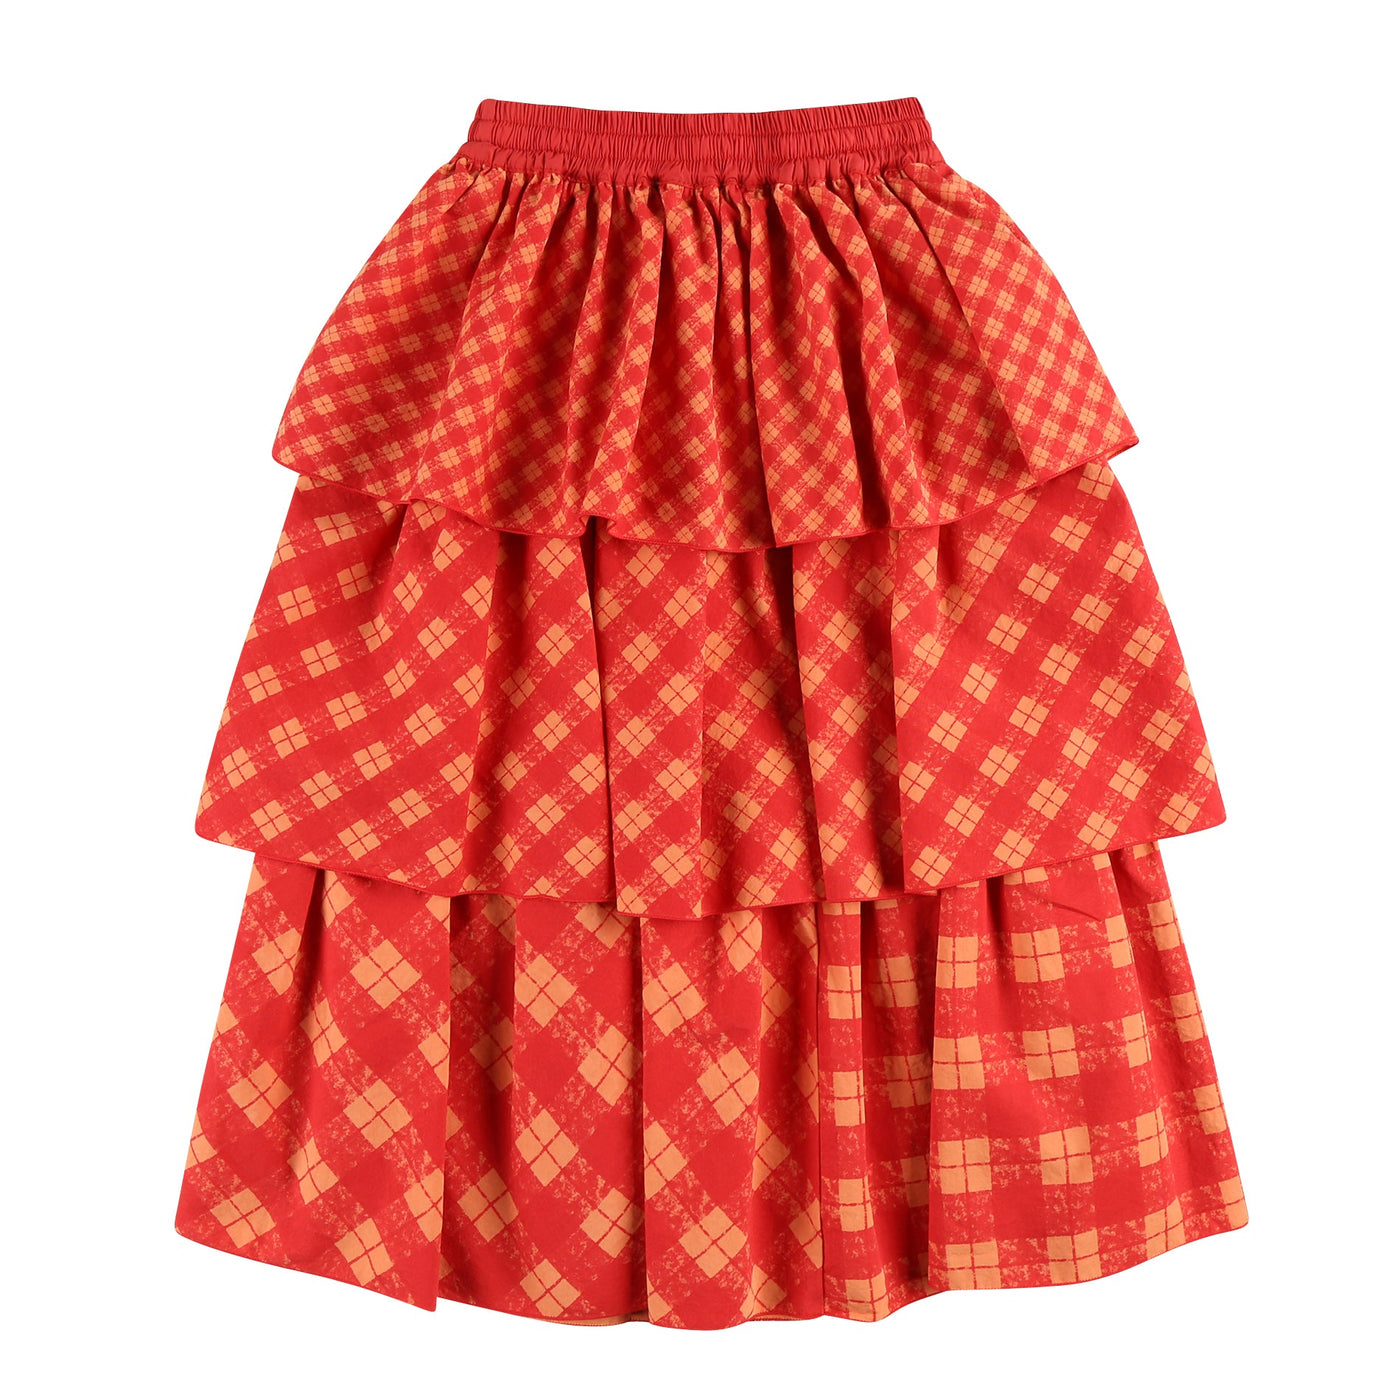 Red Check Tiered Skirt by Jelly Mallow - Petite Belle